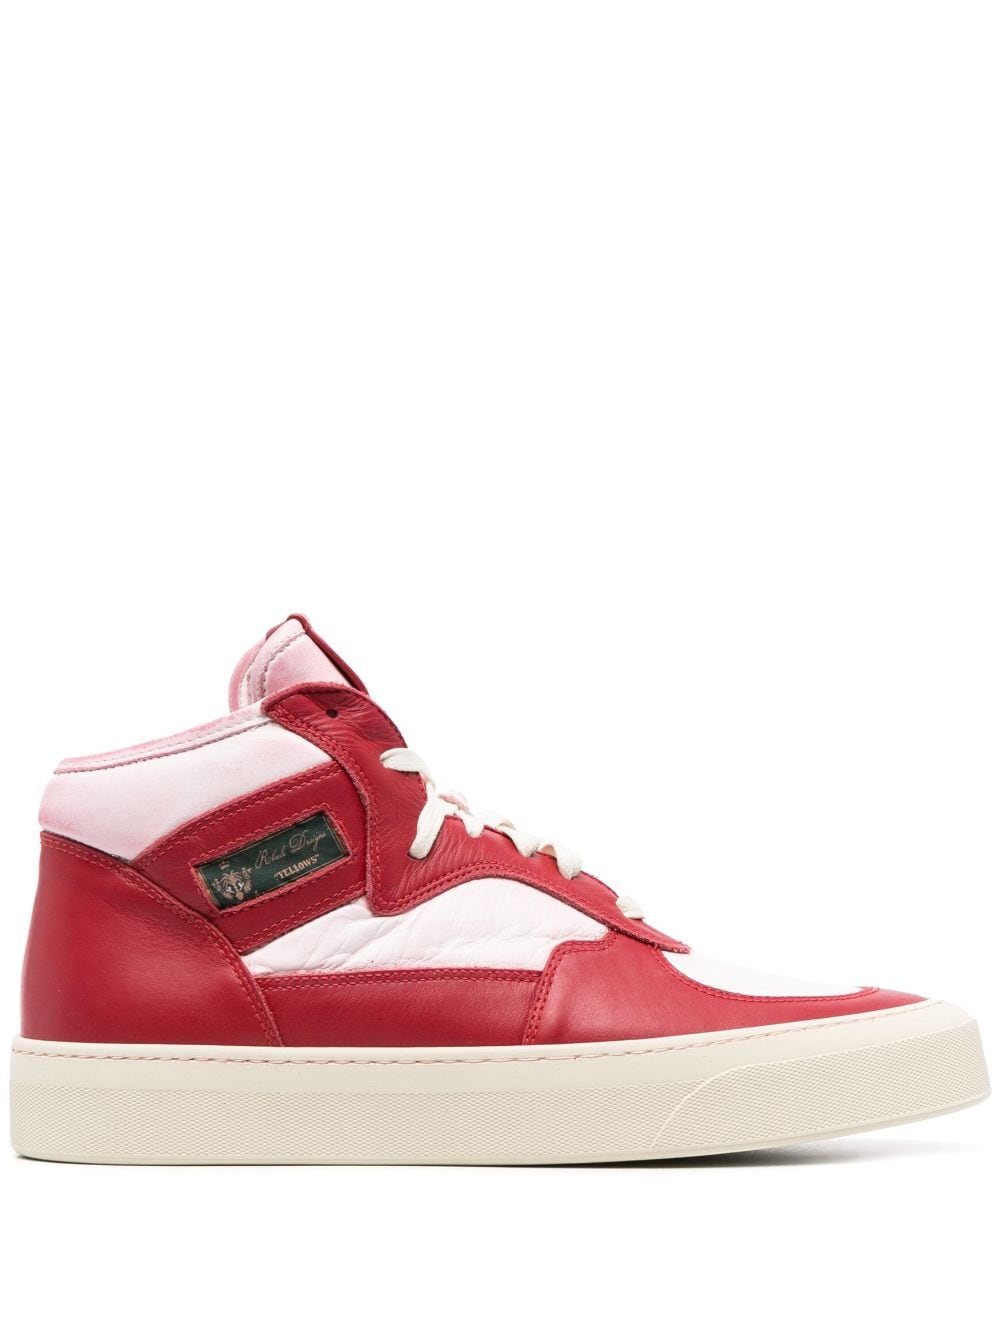 Rhude Red & White Cabriolets Sneakers In 0129 Red/white